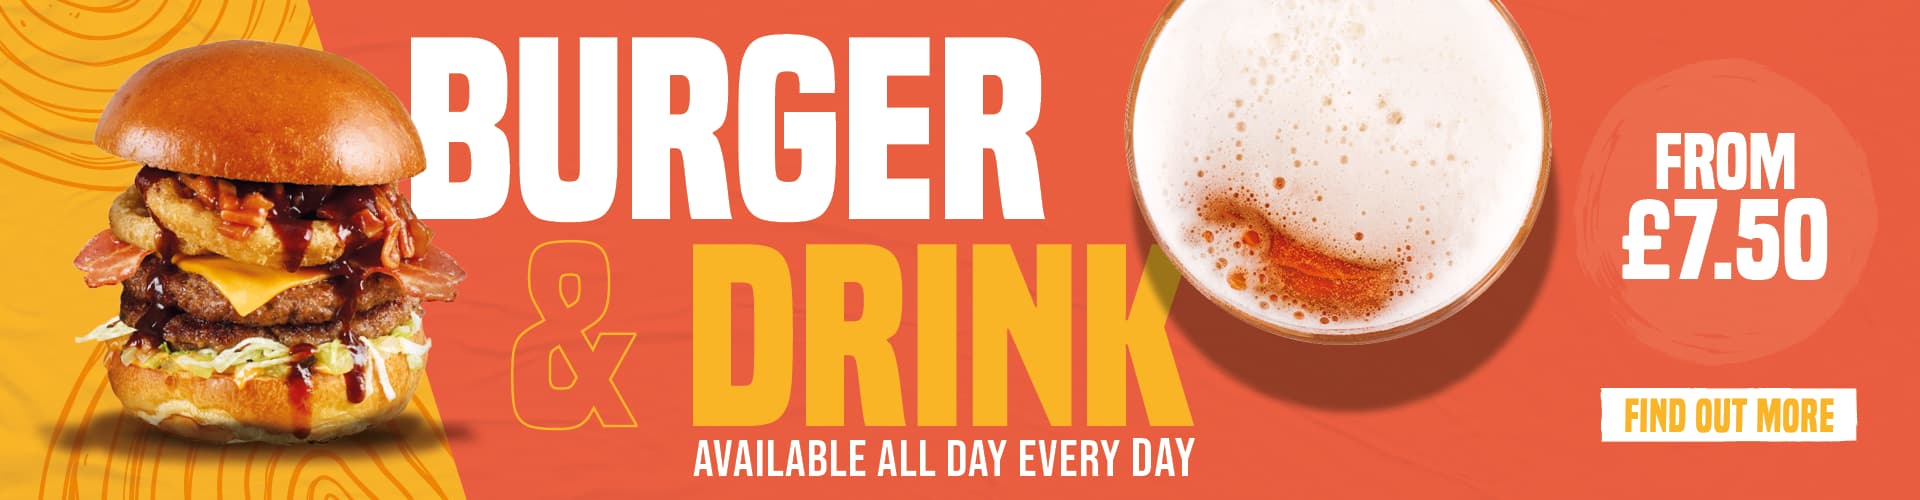 Burger & Drink, Available All Day Every Day. Find Out More. From £7.50